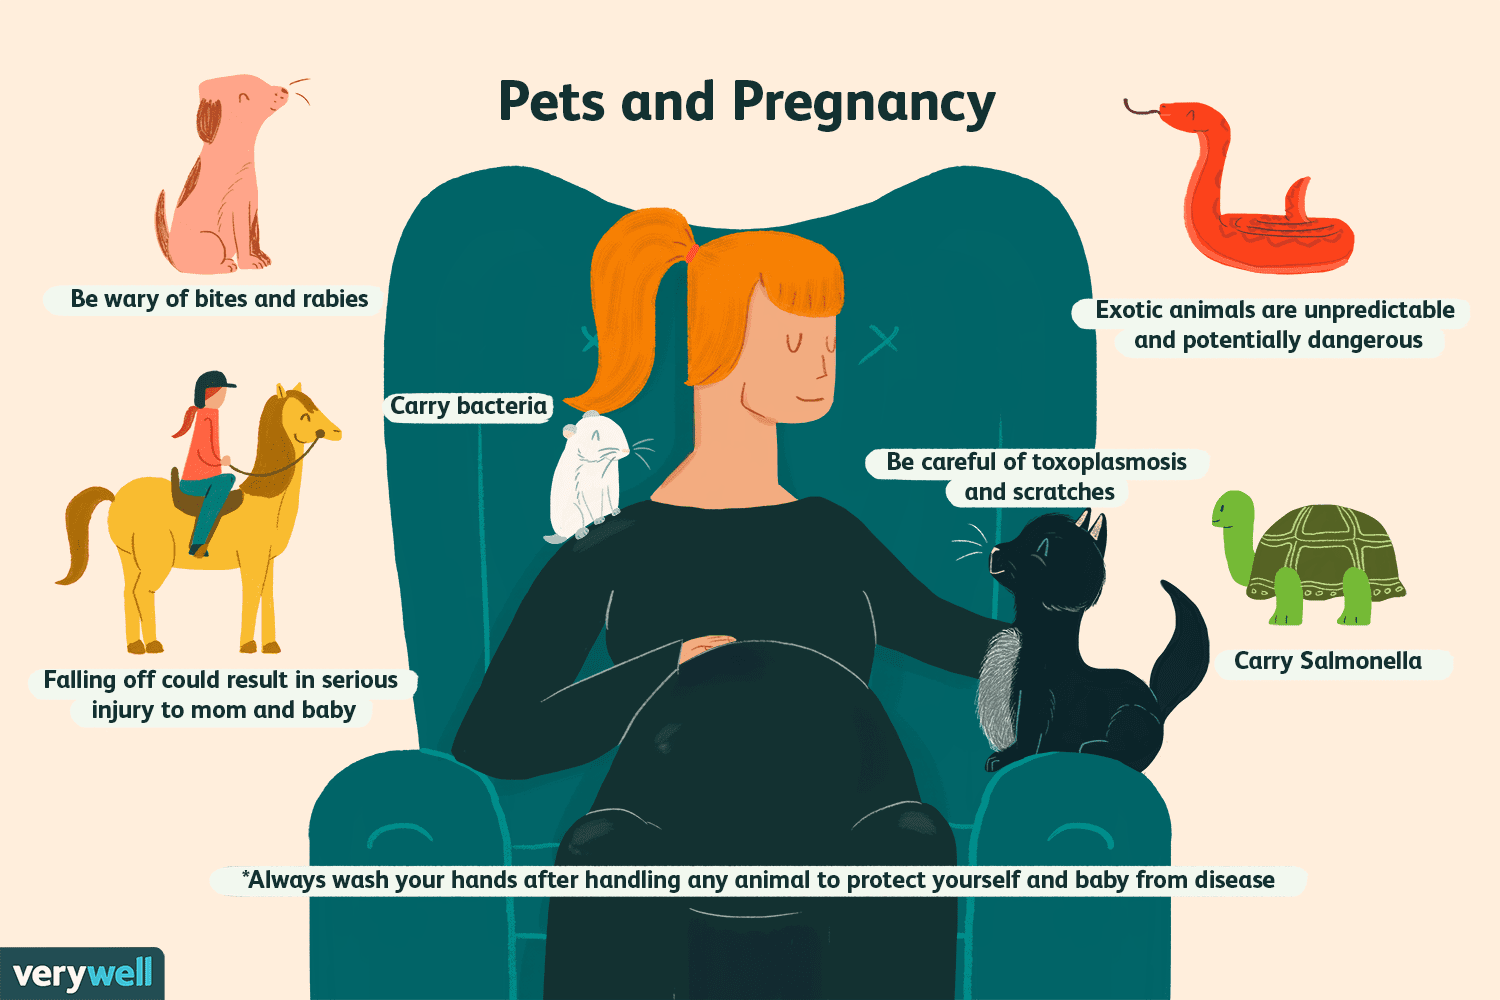 Should you touch animals when they are having babies?